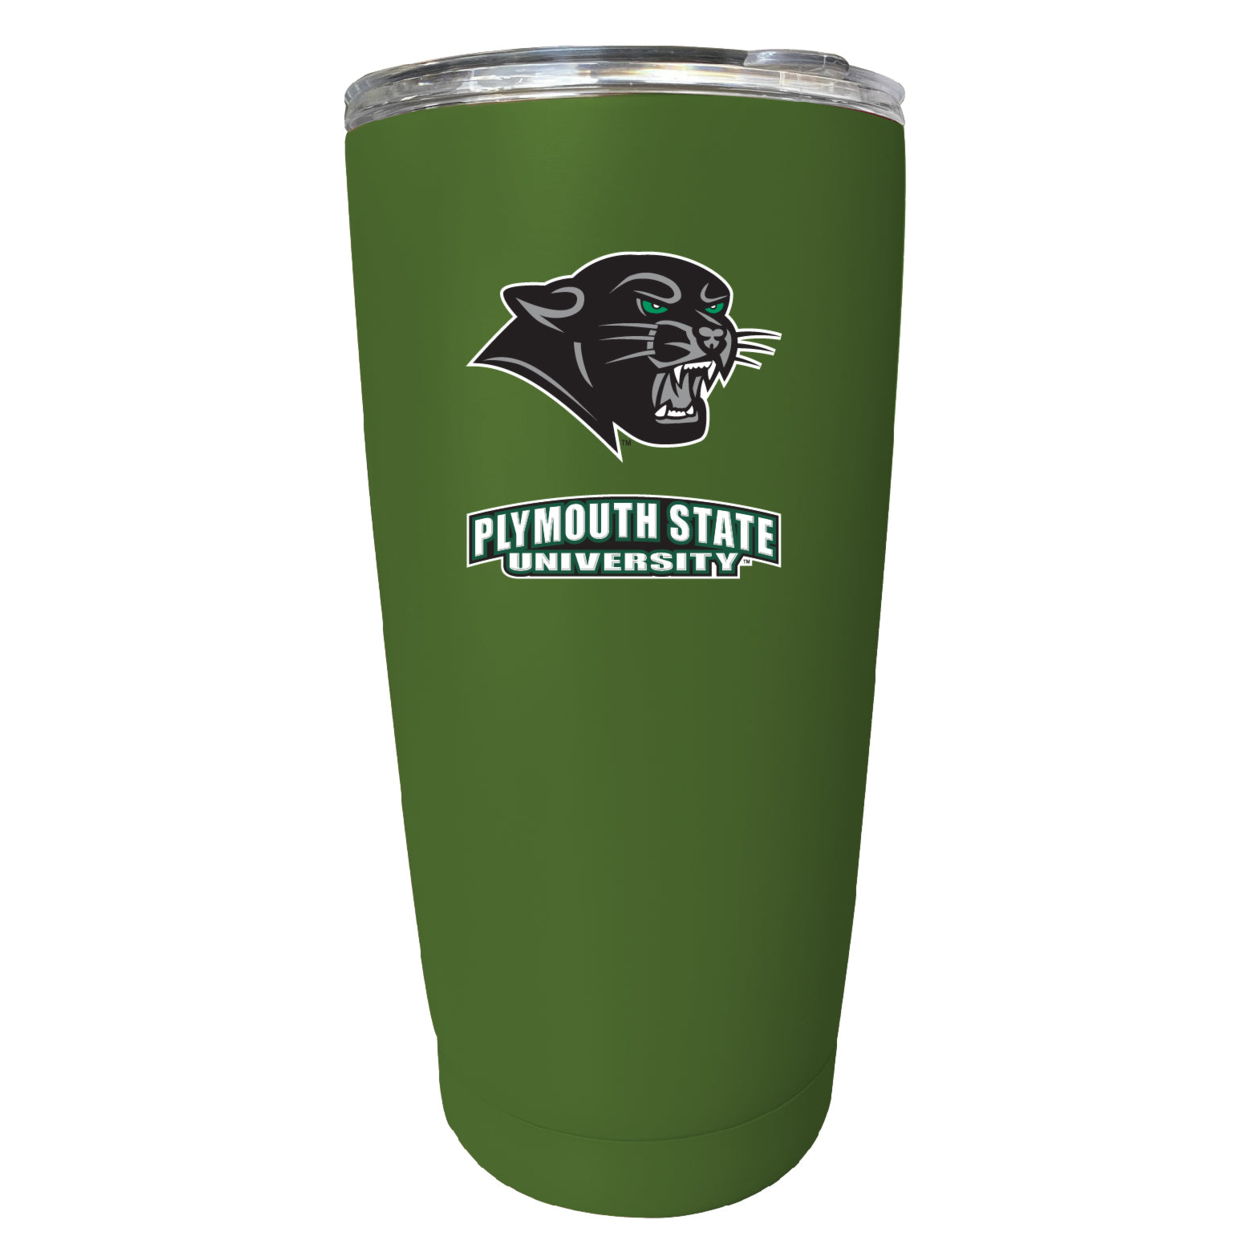 Plymouth State University 16 Oz Stainless Steel Insulated Tumbler - Gray